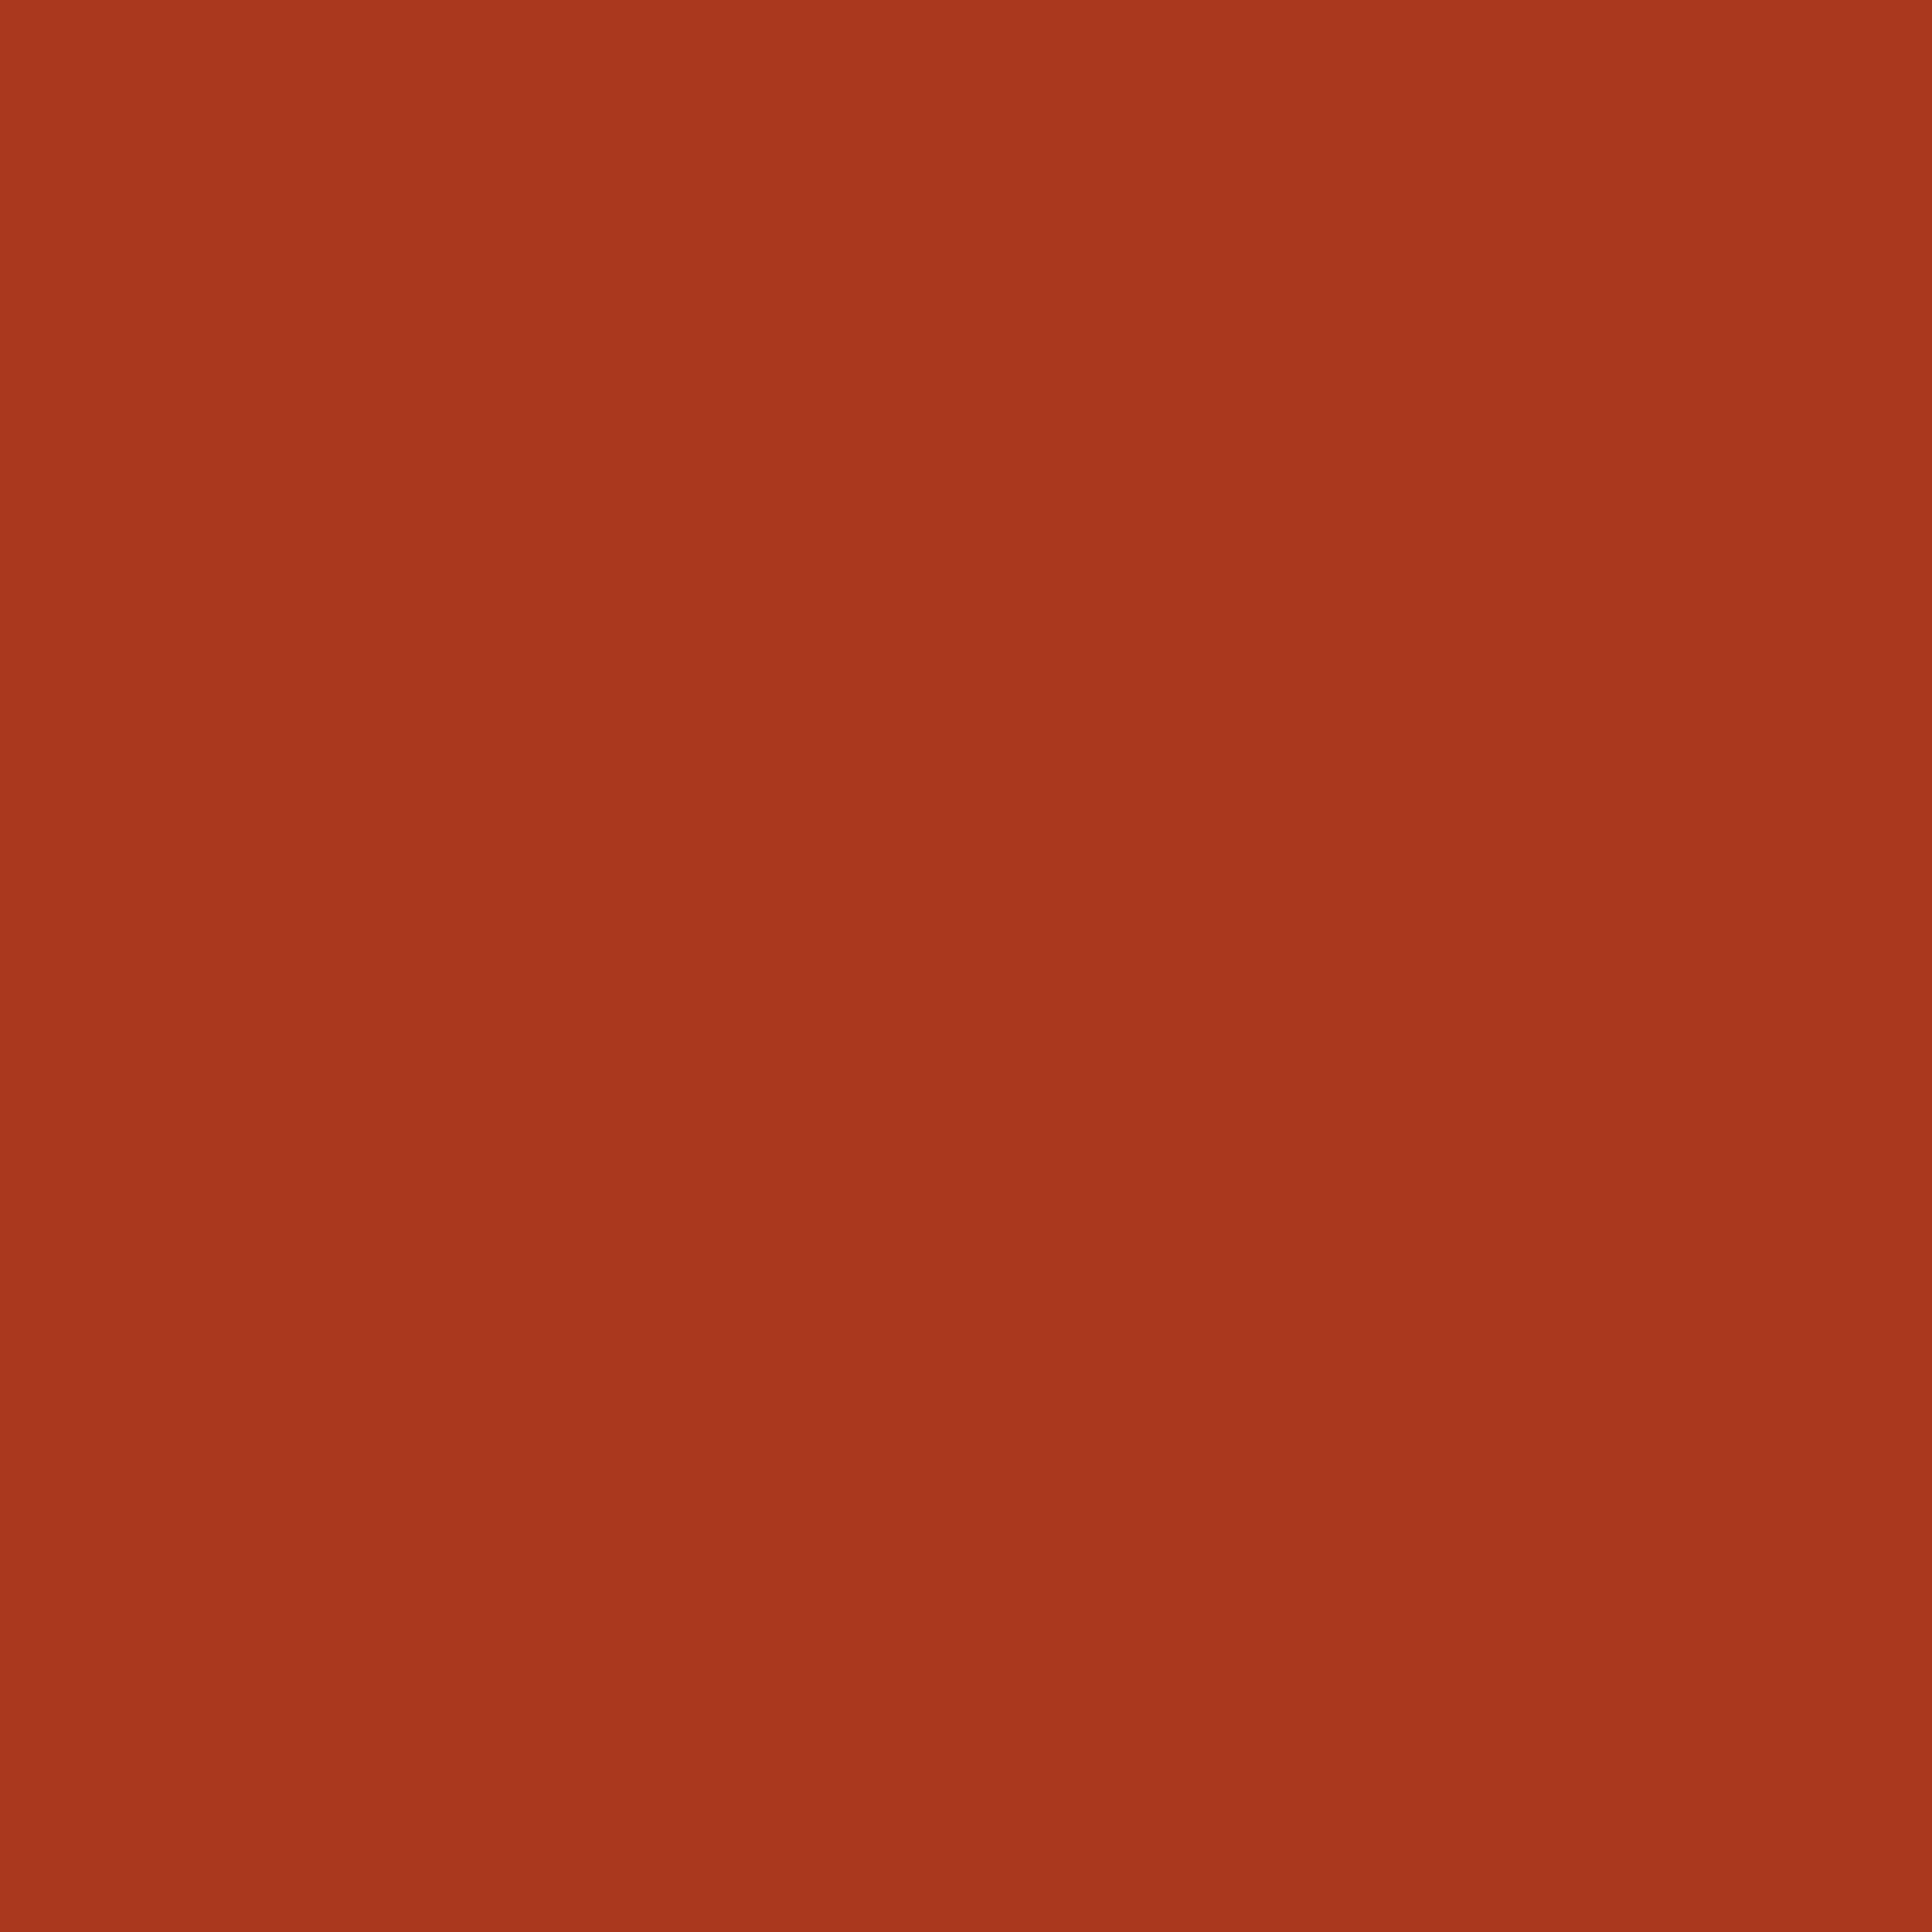 2732x2732 Chinese Red Solid Color Background